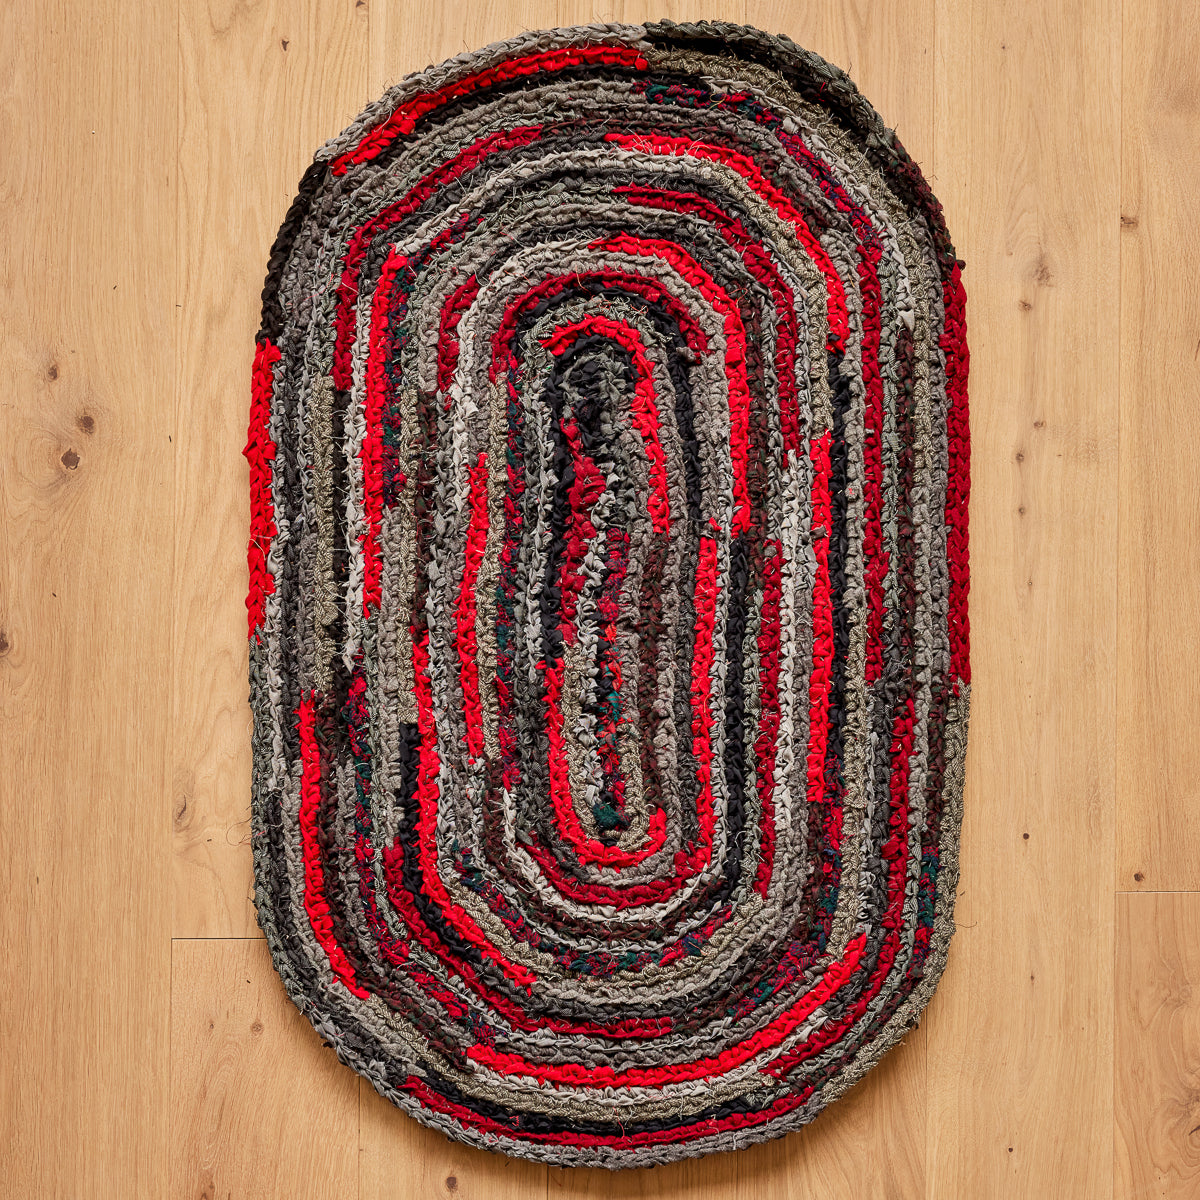 Hand Braided Oval Wool Rug 24.5” x 42” Red, Black and Tweed – CT